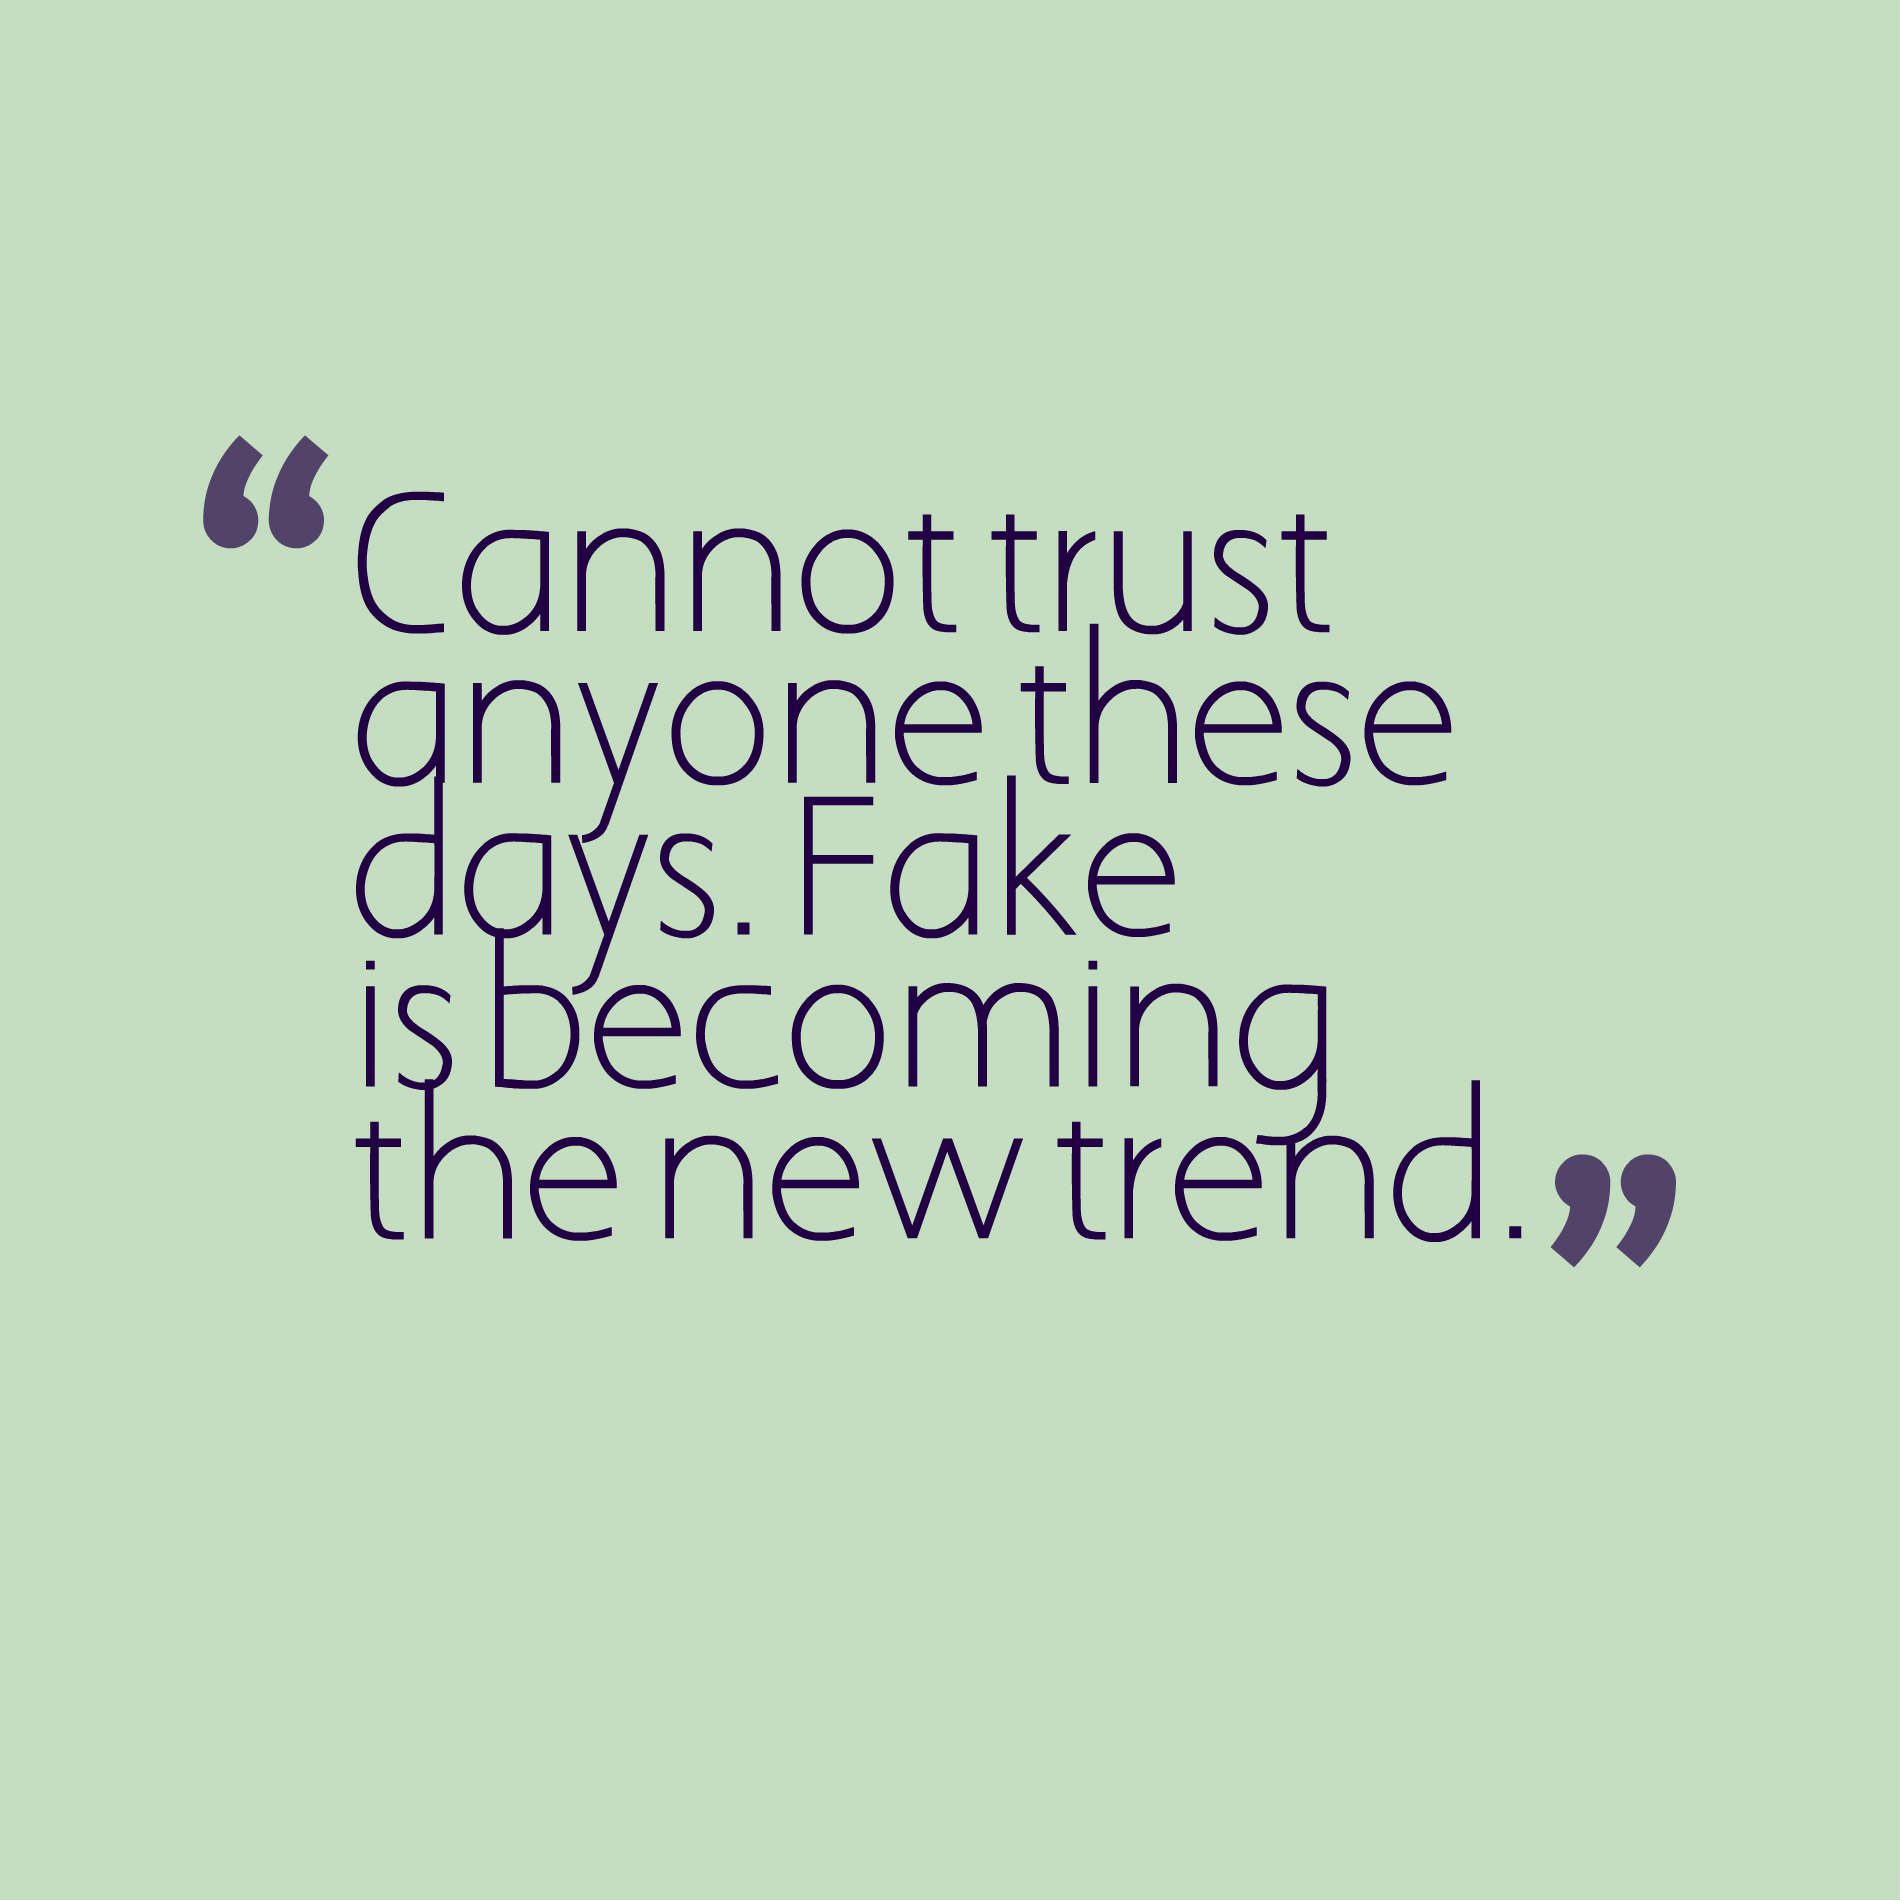 Cannot trust anyone these days. Fake is becoming the new trend